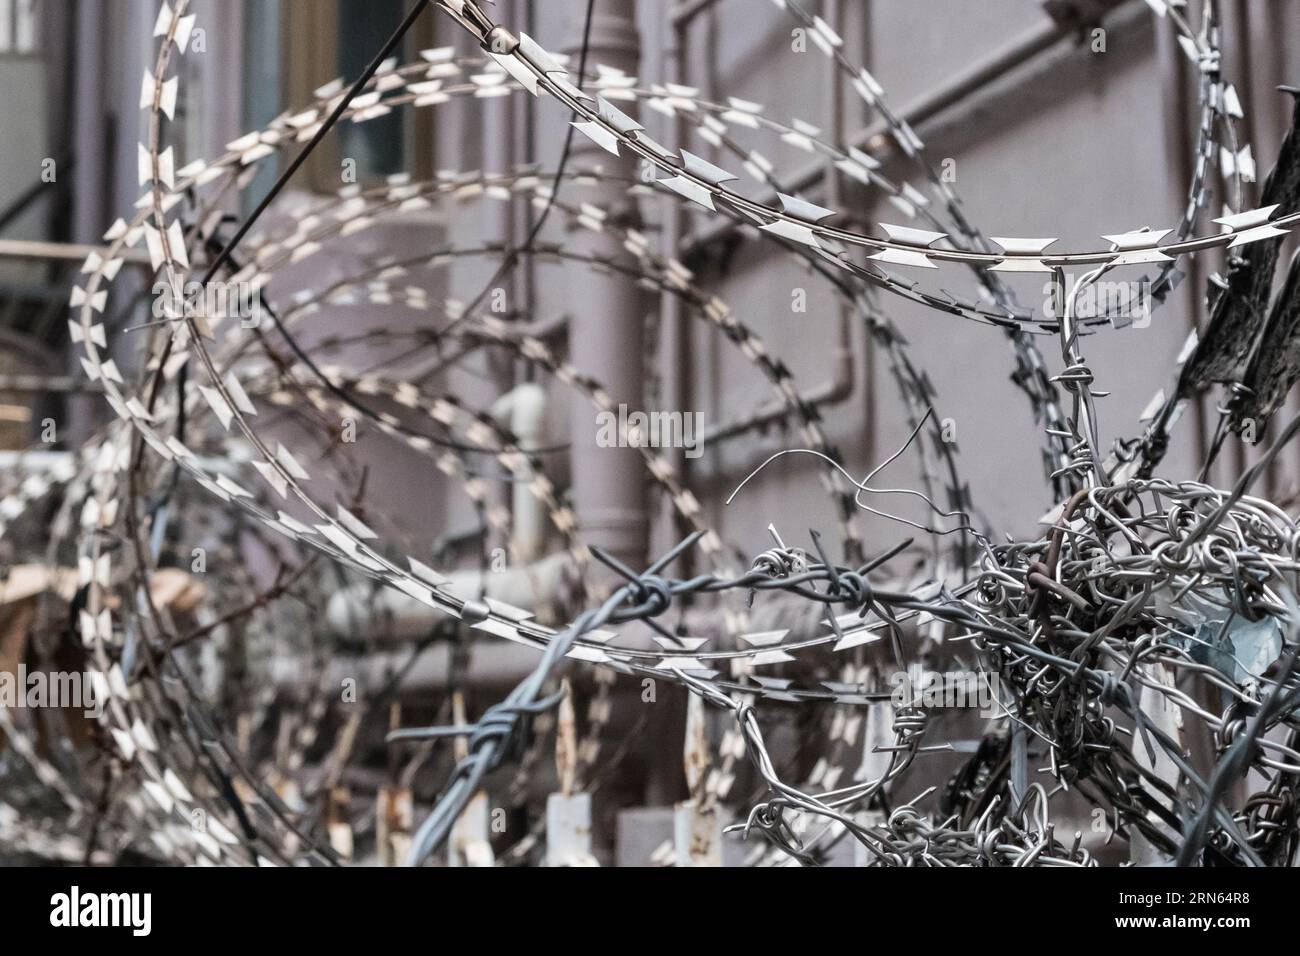 barbwire closeup, fence with barb wire securing property Stock Photo